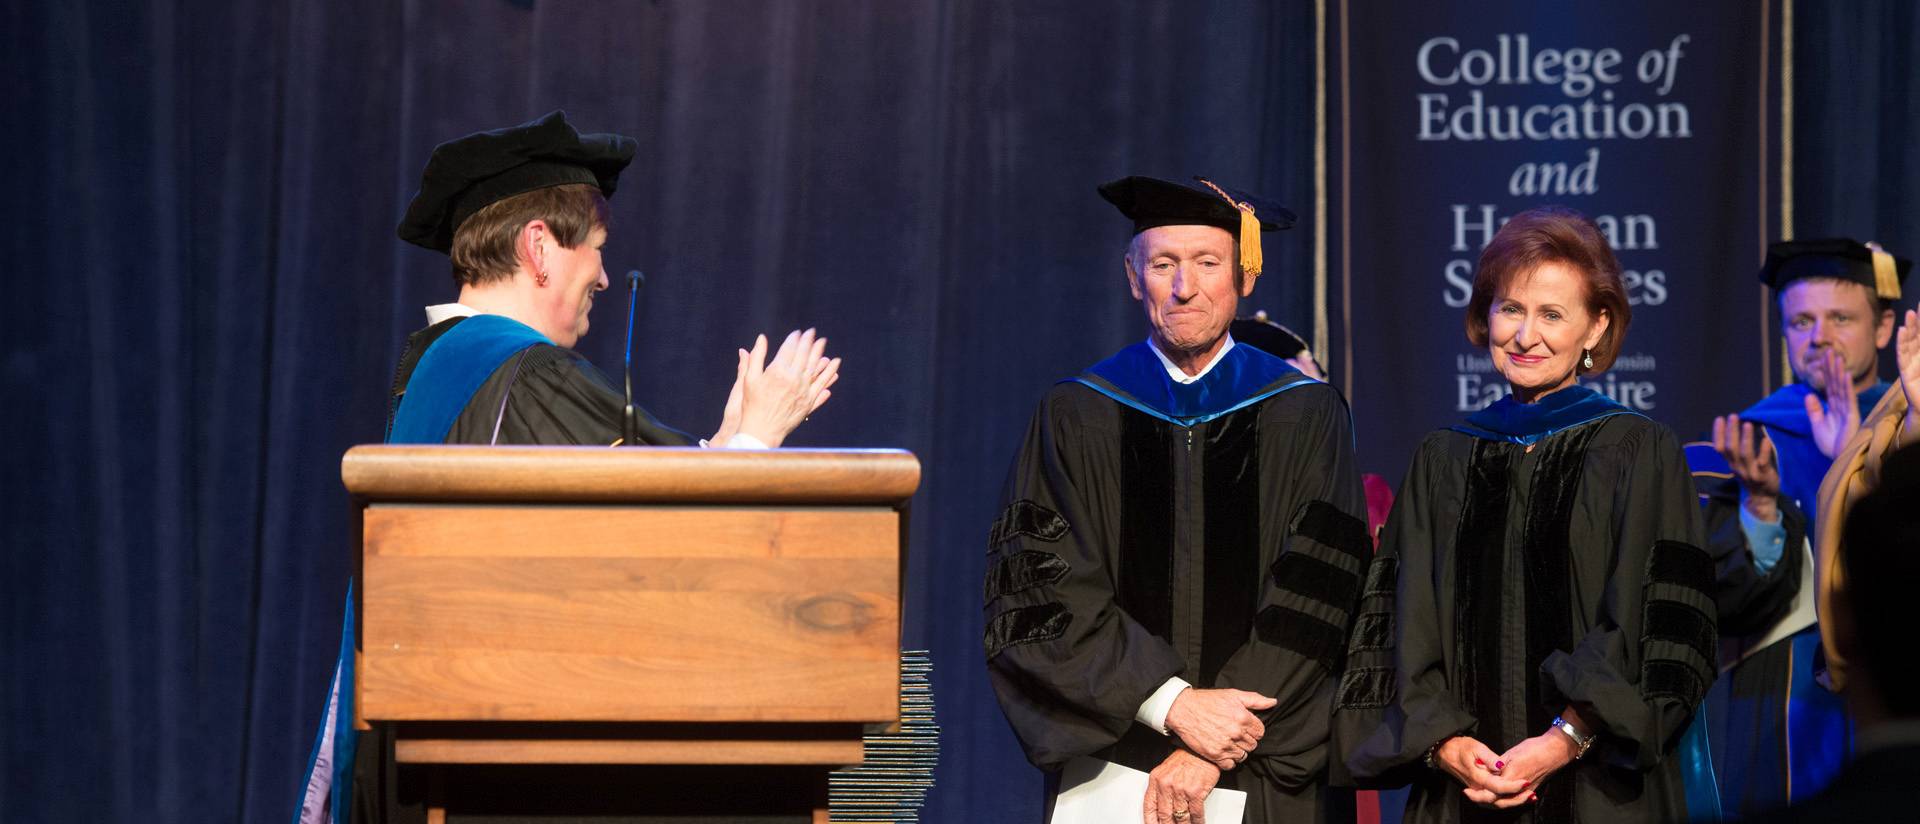 John and Carolyn Sonnentag at winter 2015 commencement